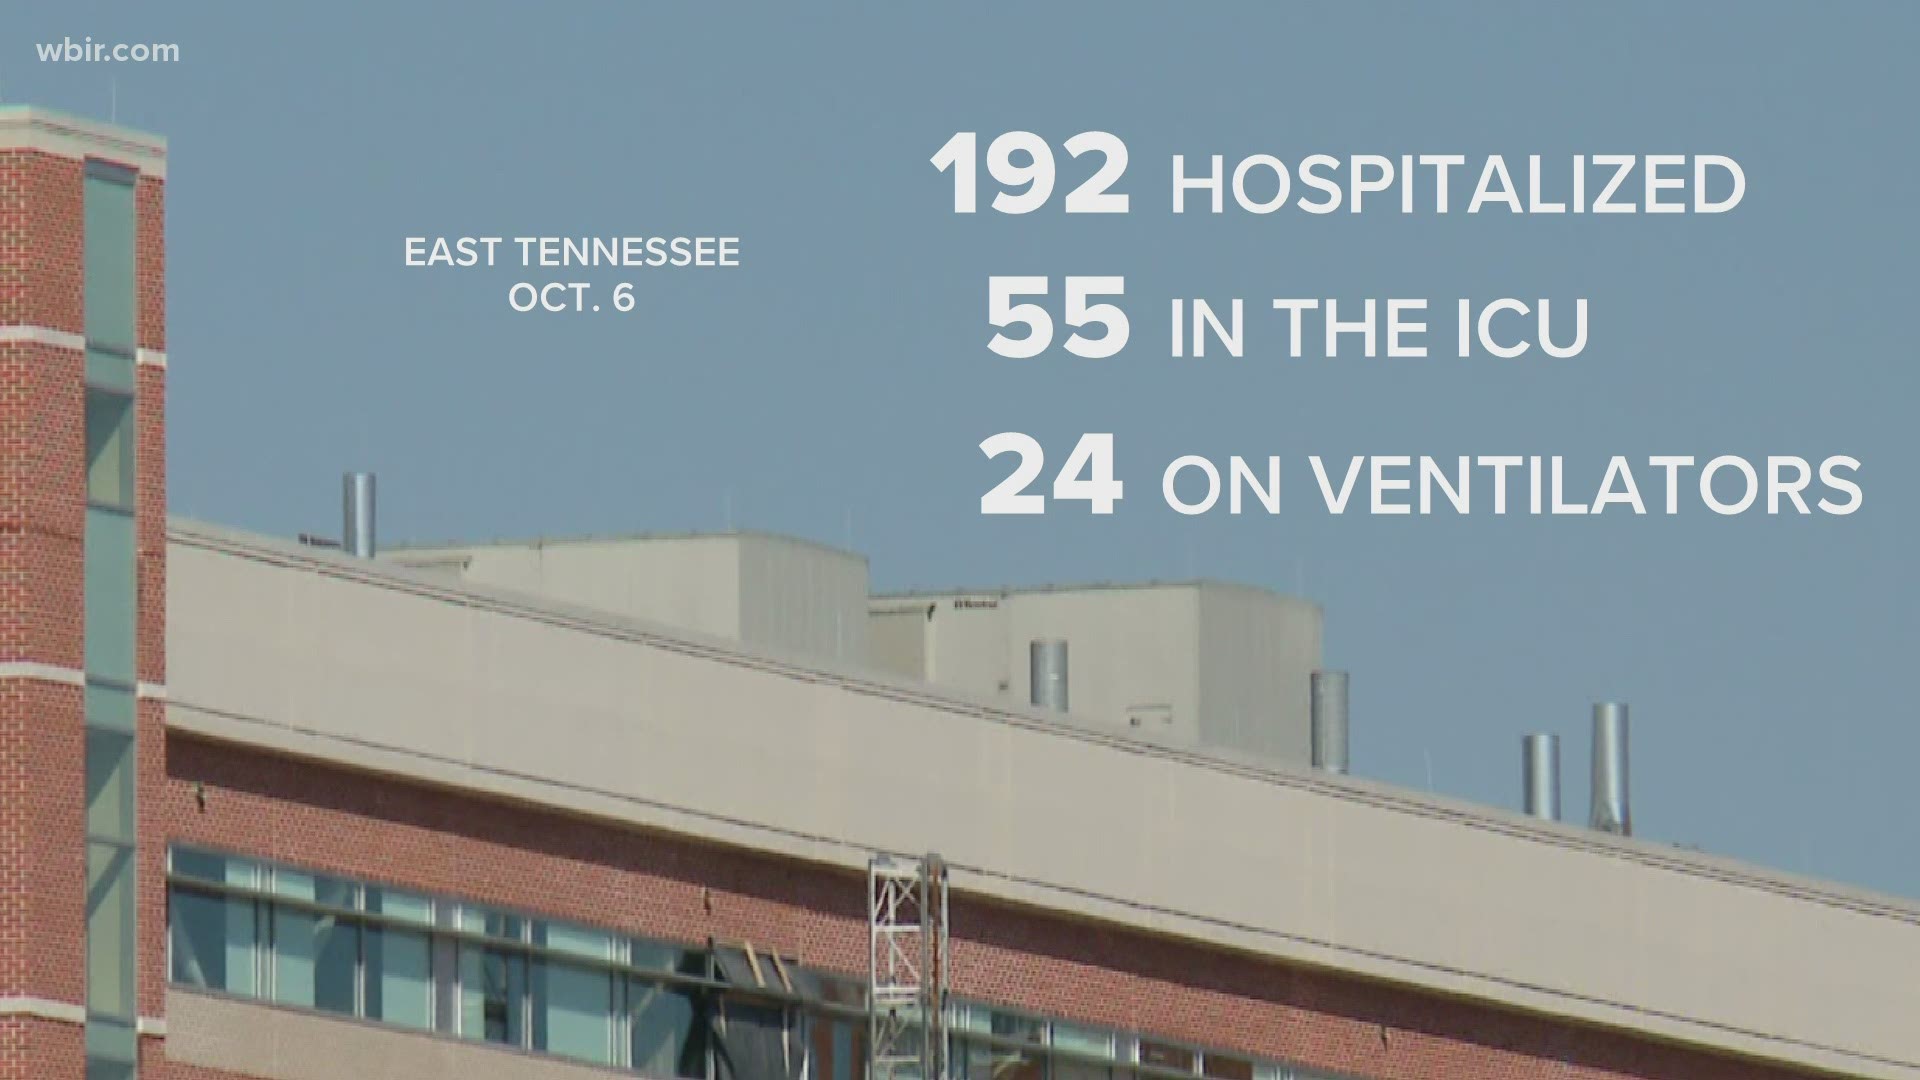 KNOX COUNTY HEALTH LEADERS SAY THEY'RE "VERY CONCERNED" AS CURRENT HOSPITALIZATIONS HIT RECORD HIGHS.